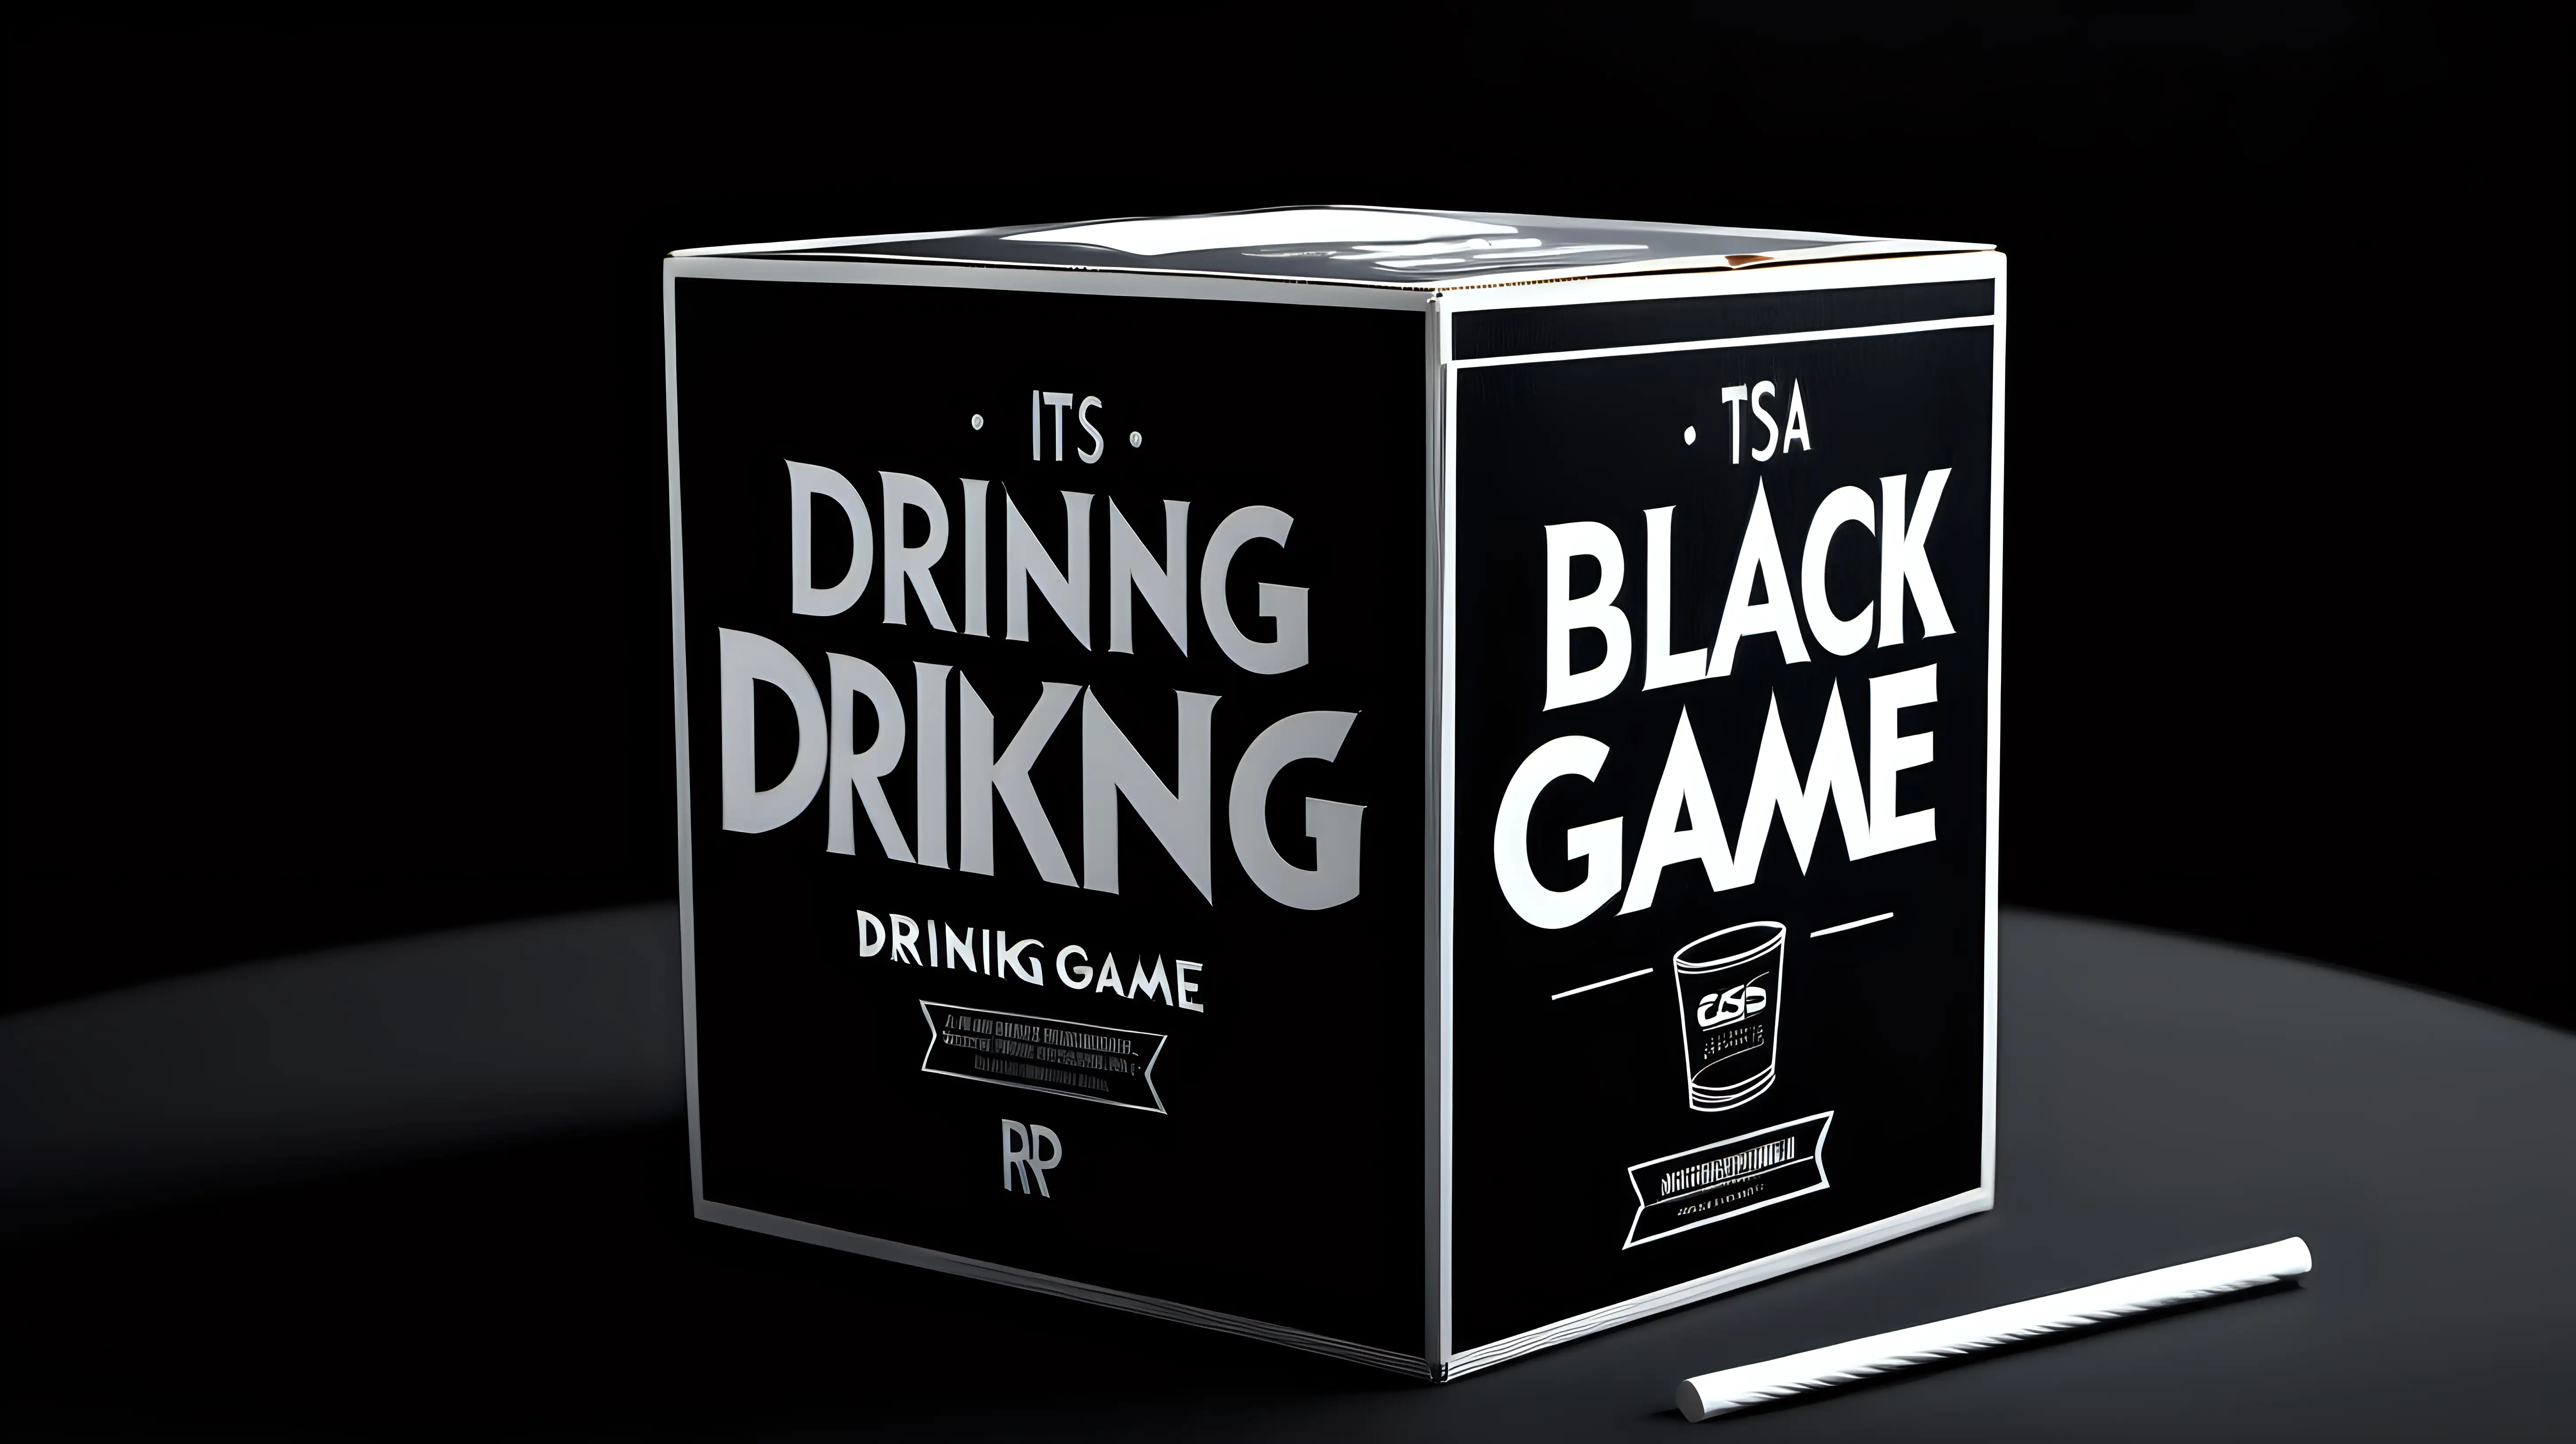 render a product photo for this
its a drinking guess game
the box is black but is cardboard
the sides are blank
the top has for the straws
the box black and white
with the background at a party
dark colors, men's fashion show look, luxury, streetwear, Cinematic, Color Grading, Depth of Field, Hyper-Detailed, Beautiful Color-Coded, Insane Details, Editorial Photography, Photorealistic, UHD, HDR, HD, Natural Lighting, Canon EOS R3, F1,4, ISO 200, 1160s, 32K, RAW, Pro Photo RGB, Bokeh, High Quality, 400MP, Megapixel, Super-Resolution